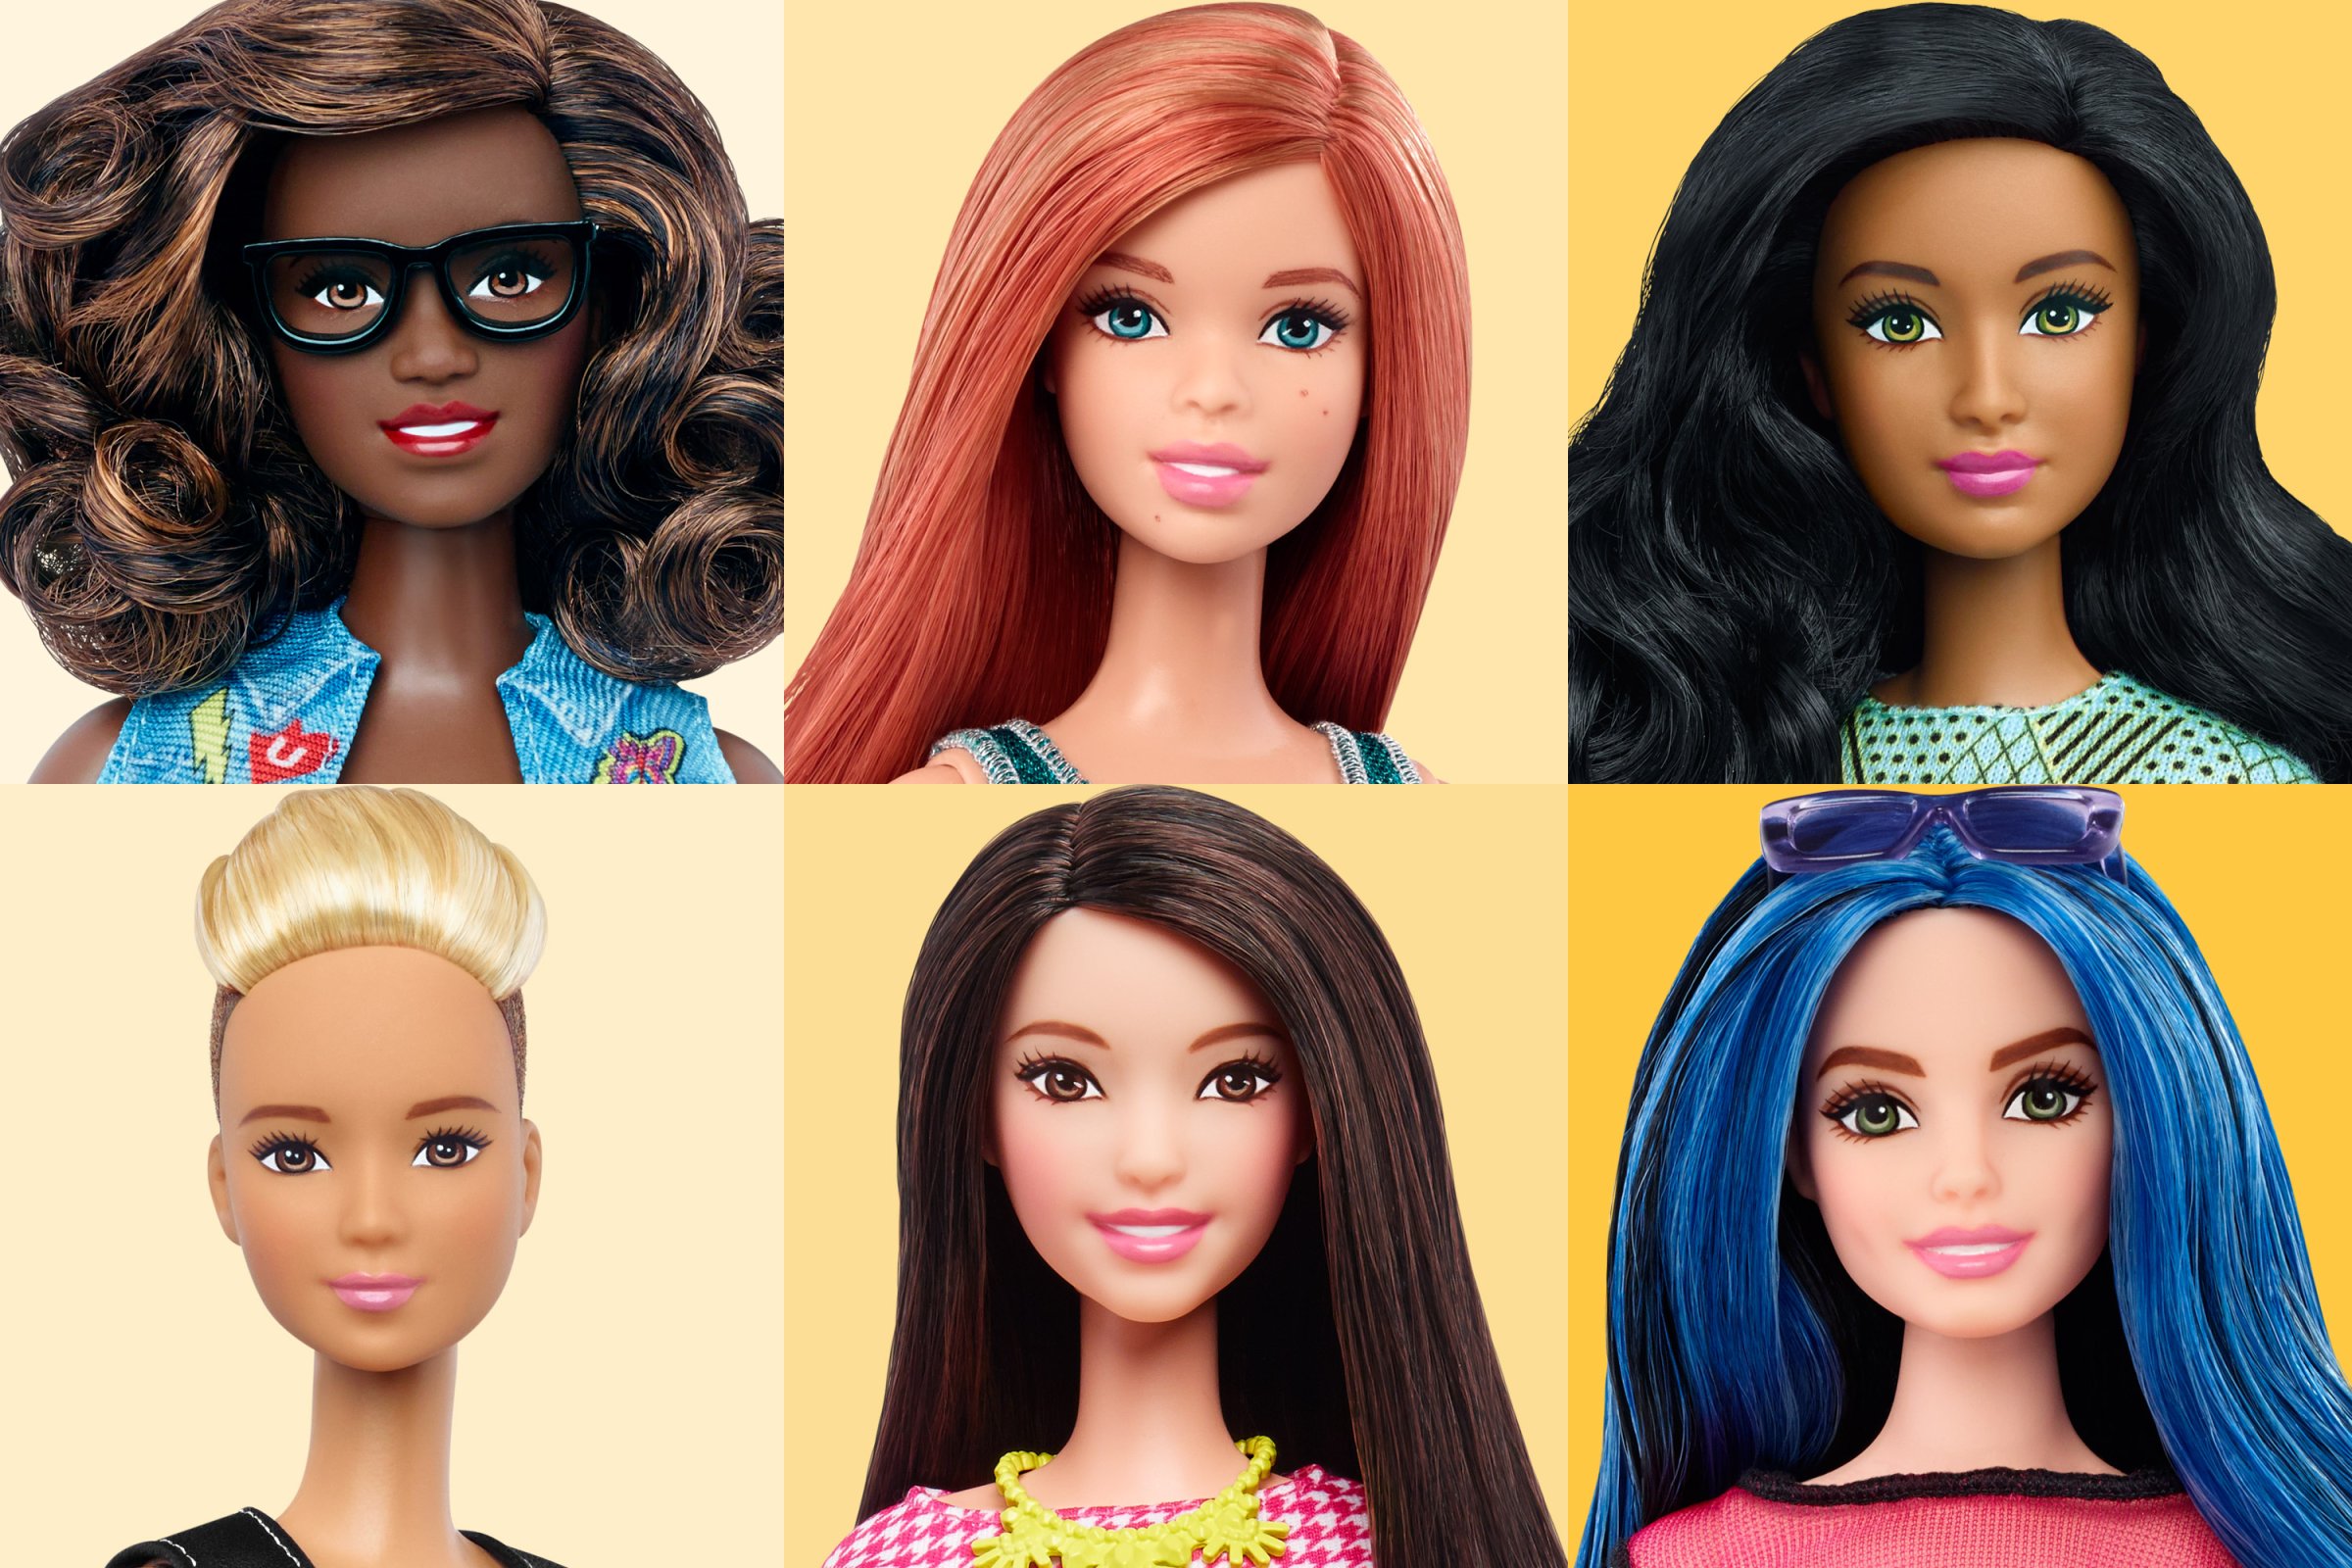 See all the new Barbie body shapes skin tones